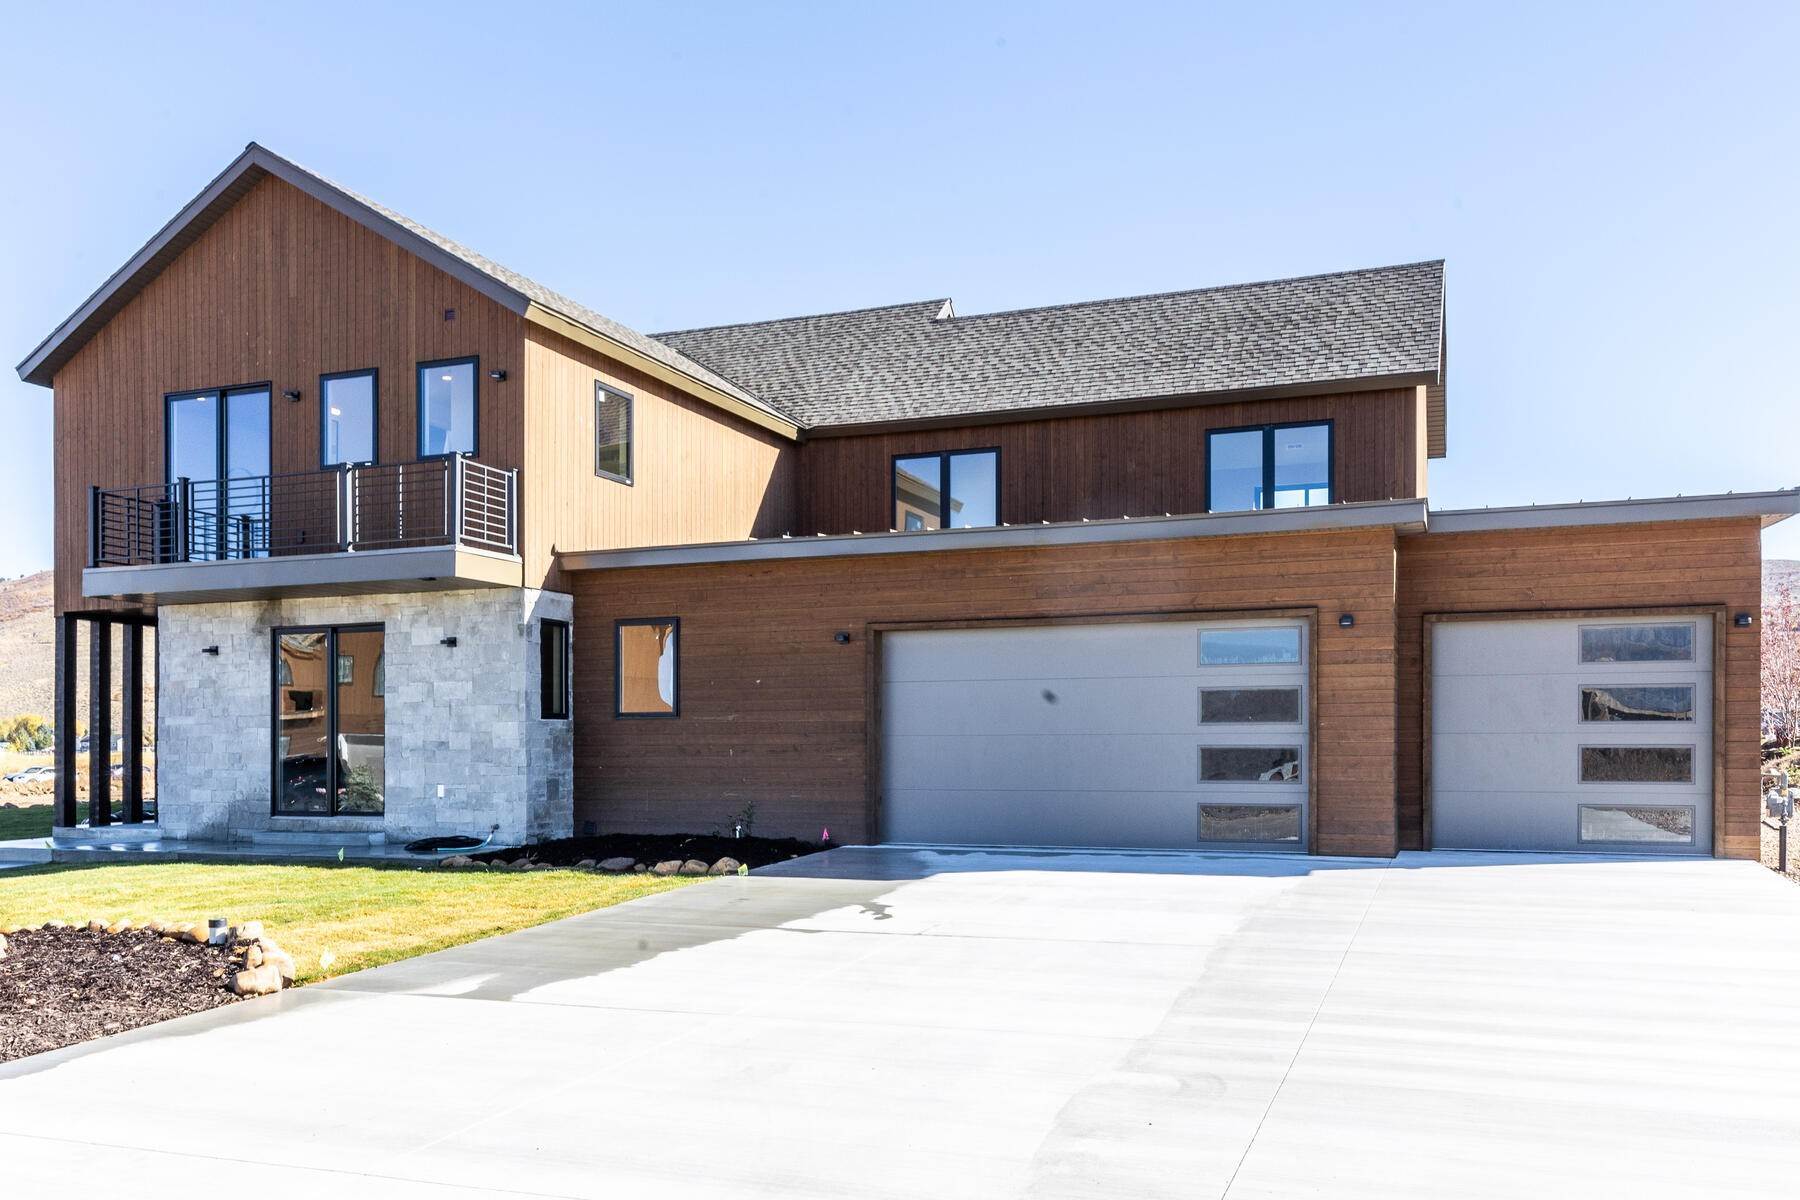 Single Family Homes for Sale at New Construction Turnkey 4 Bedroom Model Unit with Flex Room & Mountain Views 690 Lazy Way Francis, Utah 84036 United States